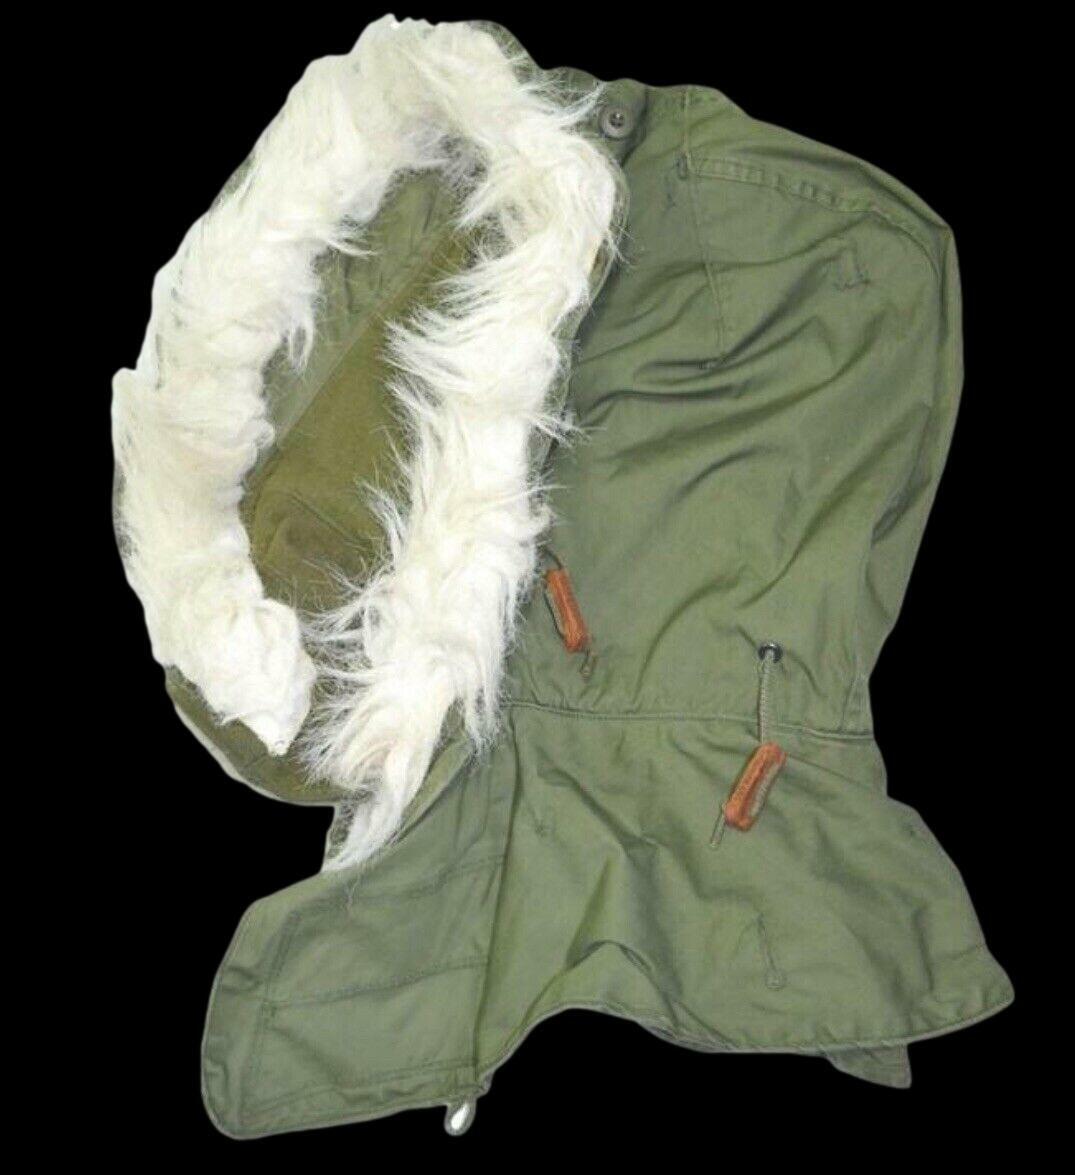 NEW GENUINE MILITARY M-65 M-51 HOOD FISHTAIL PARKA EXTREME COLD WEATHER USA MADE